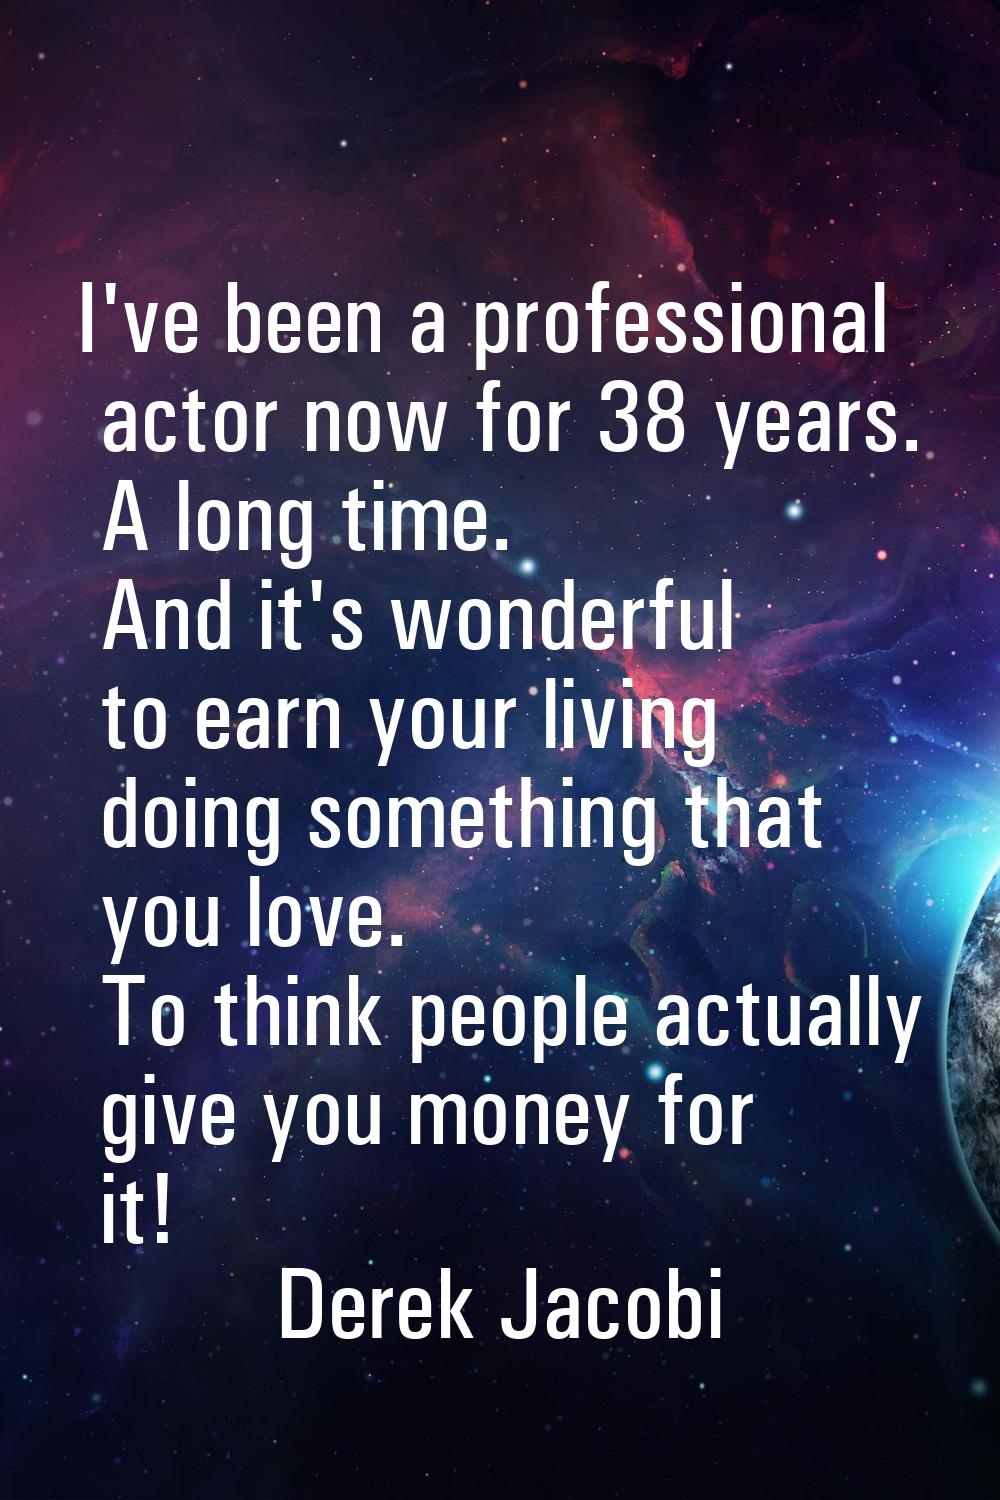 I've been a professional actor now for 38 years. A long time. And it's wonderful to earn your livin